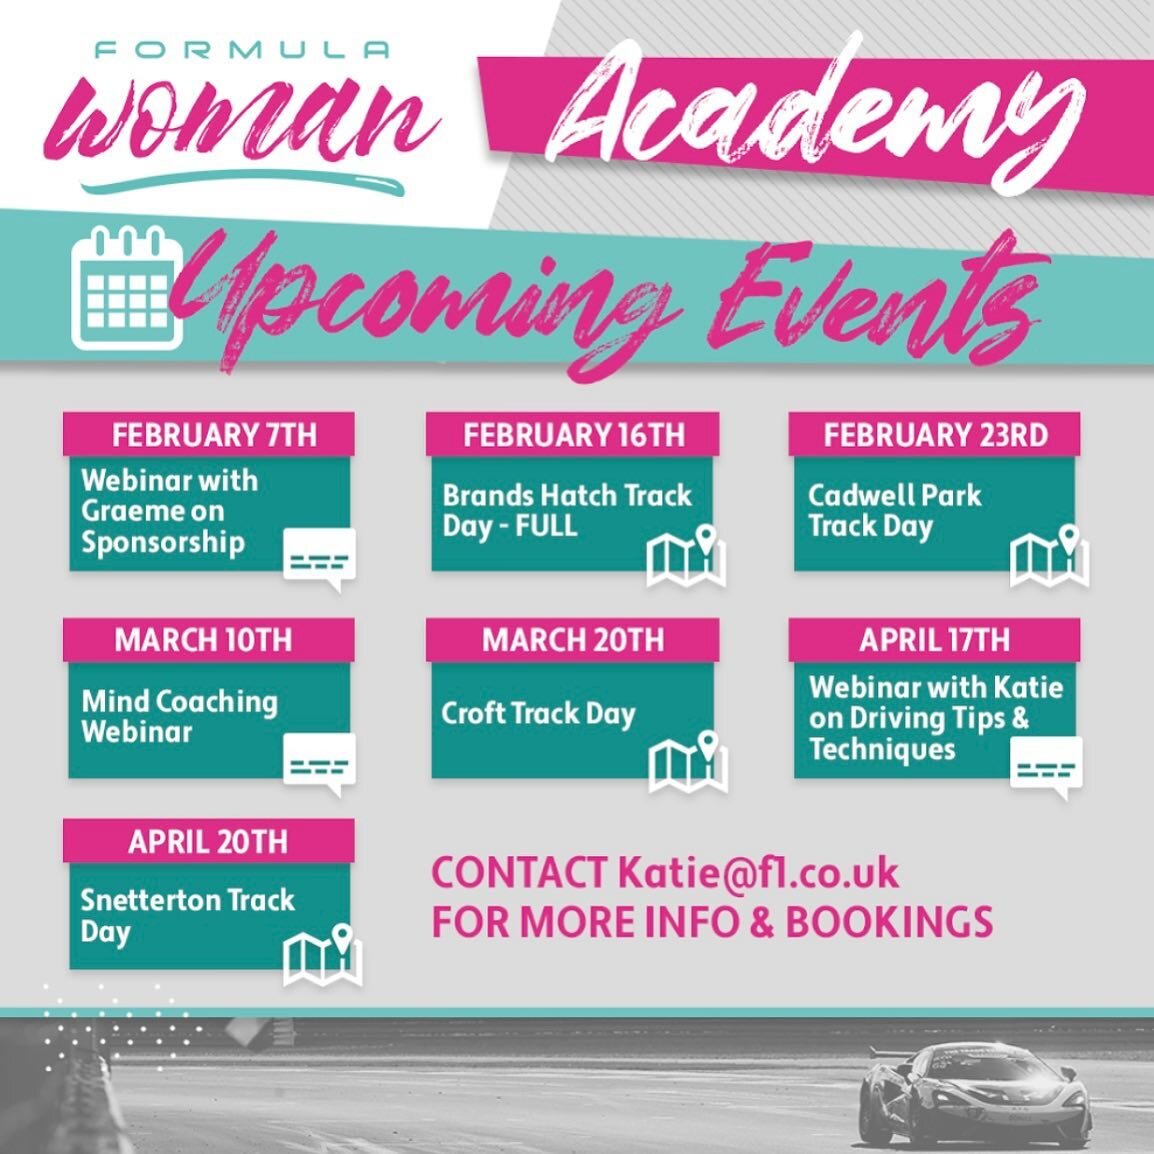 The first official dates have been released for all our new academy members! 🎉

We are extremely excited to progress together as a team and increase the percentage of females entering this sport.

Contact katie@f1.co.uk for further information on ou